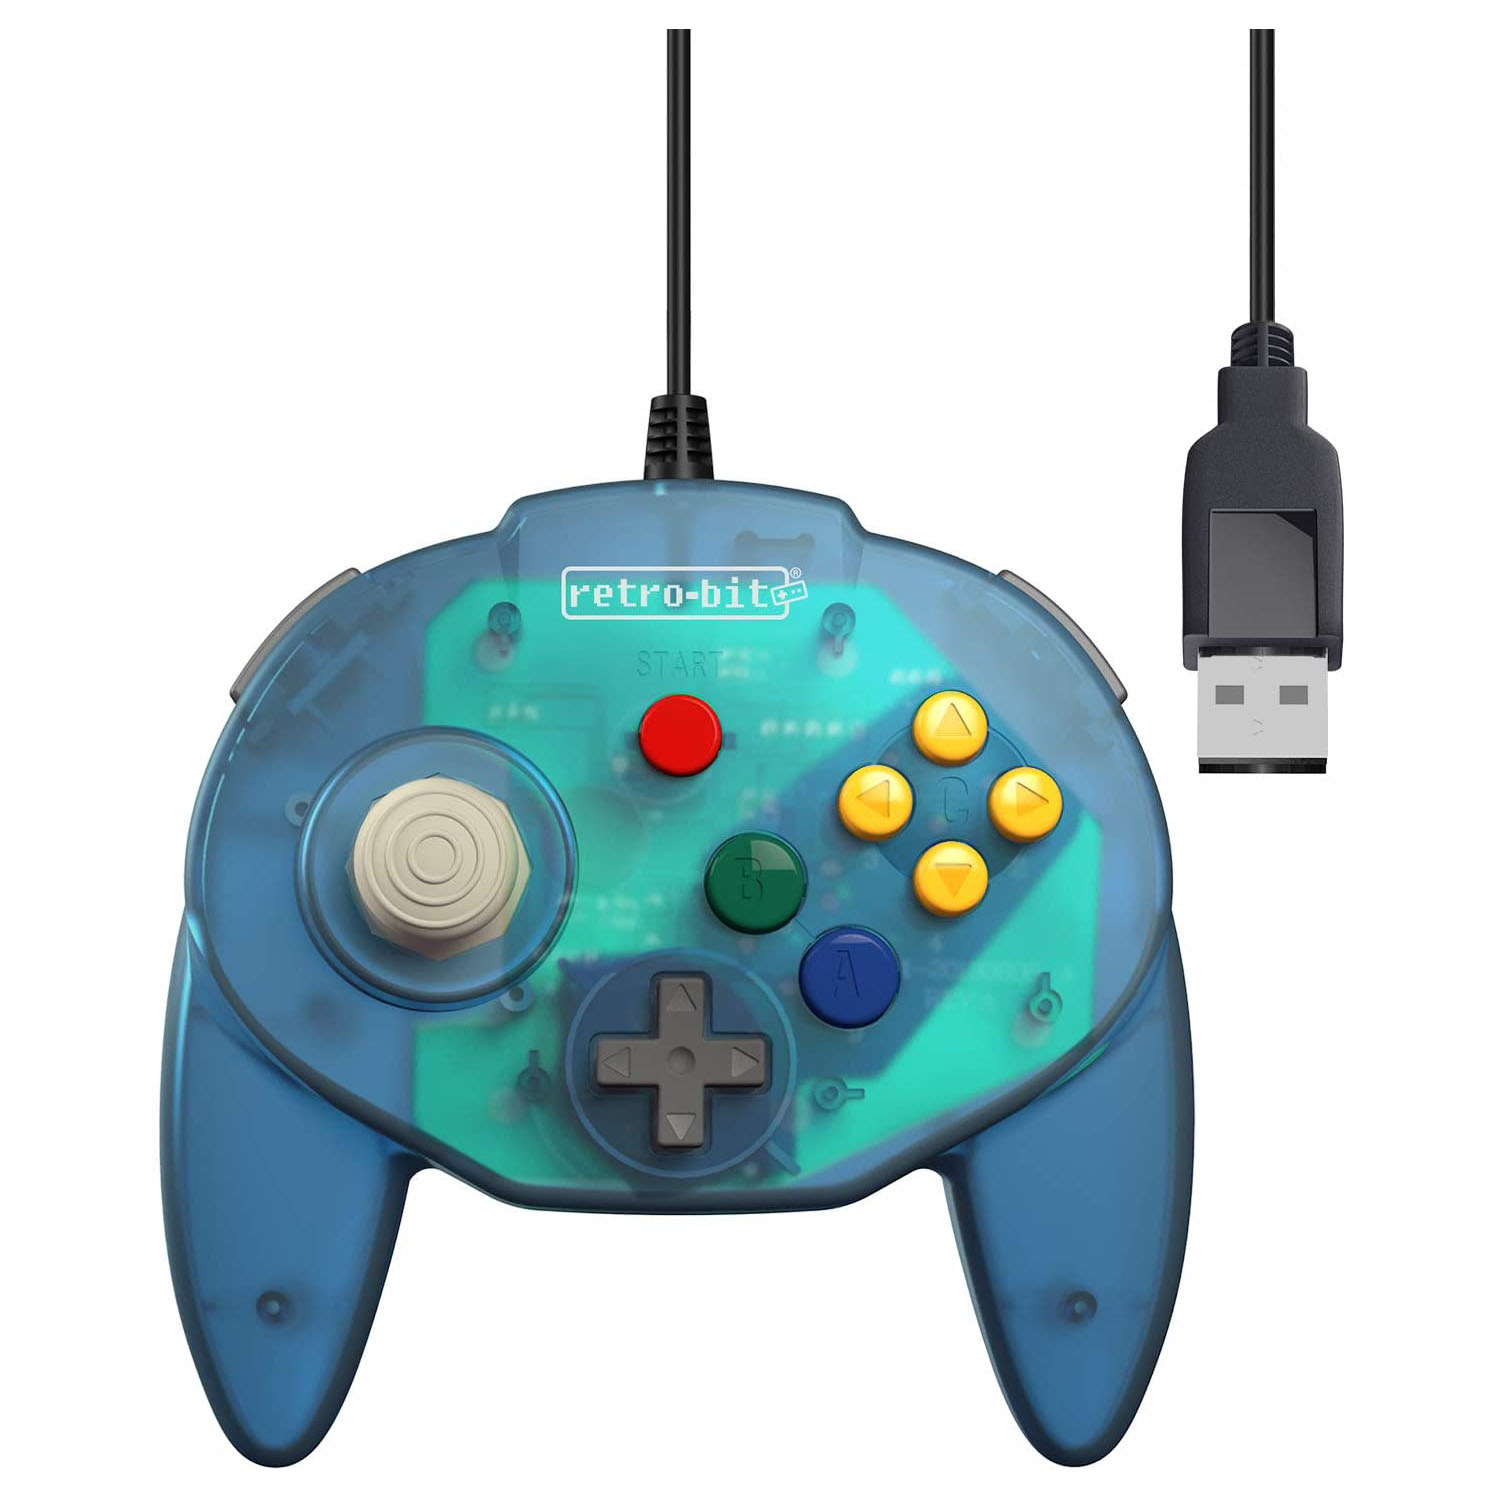 n64 usb controller adapter for mac